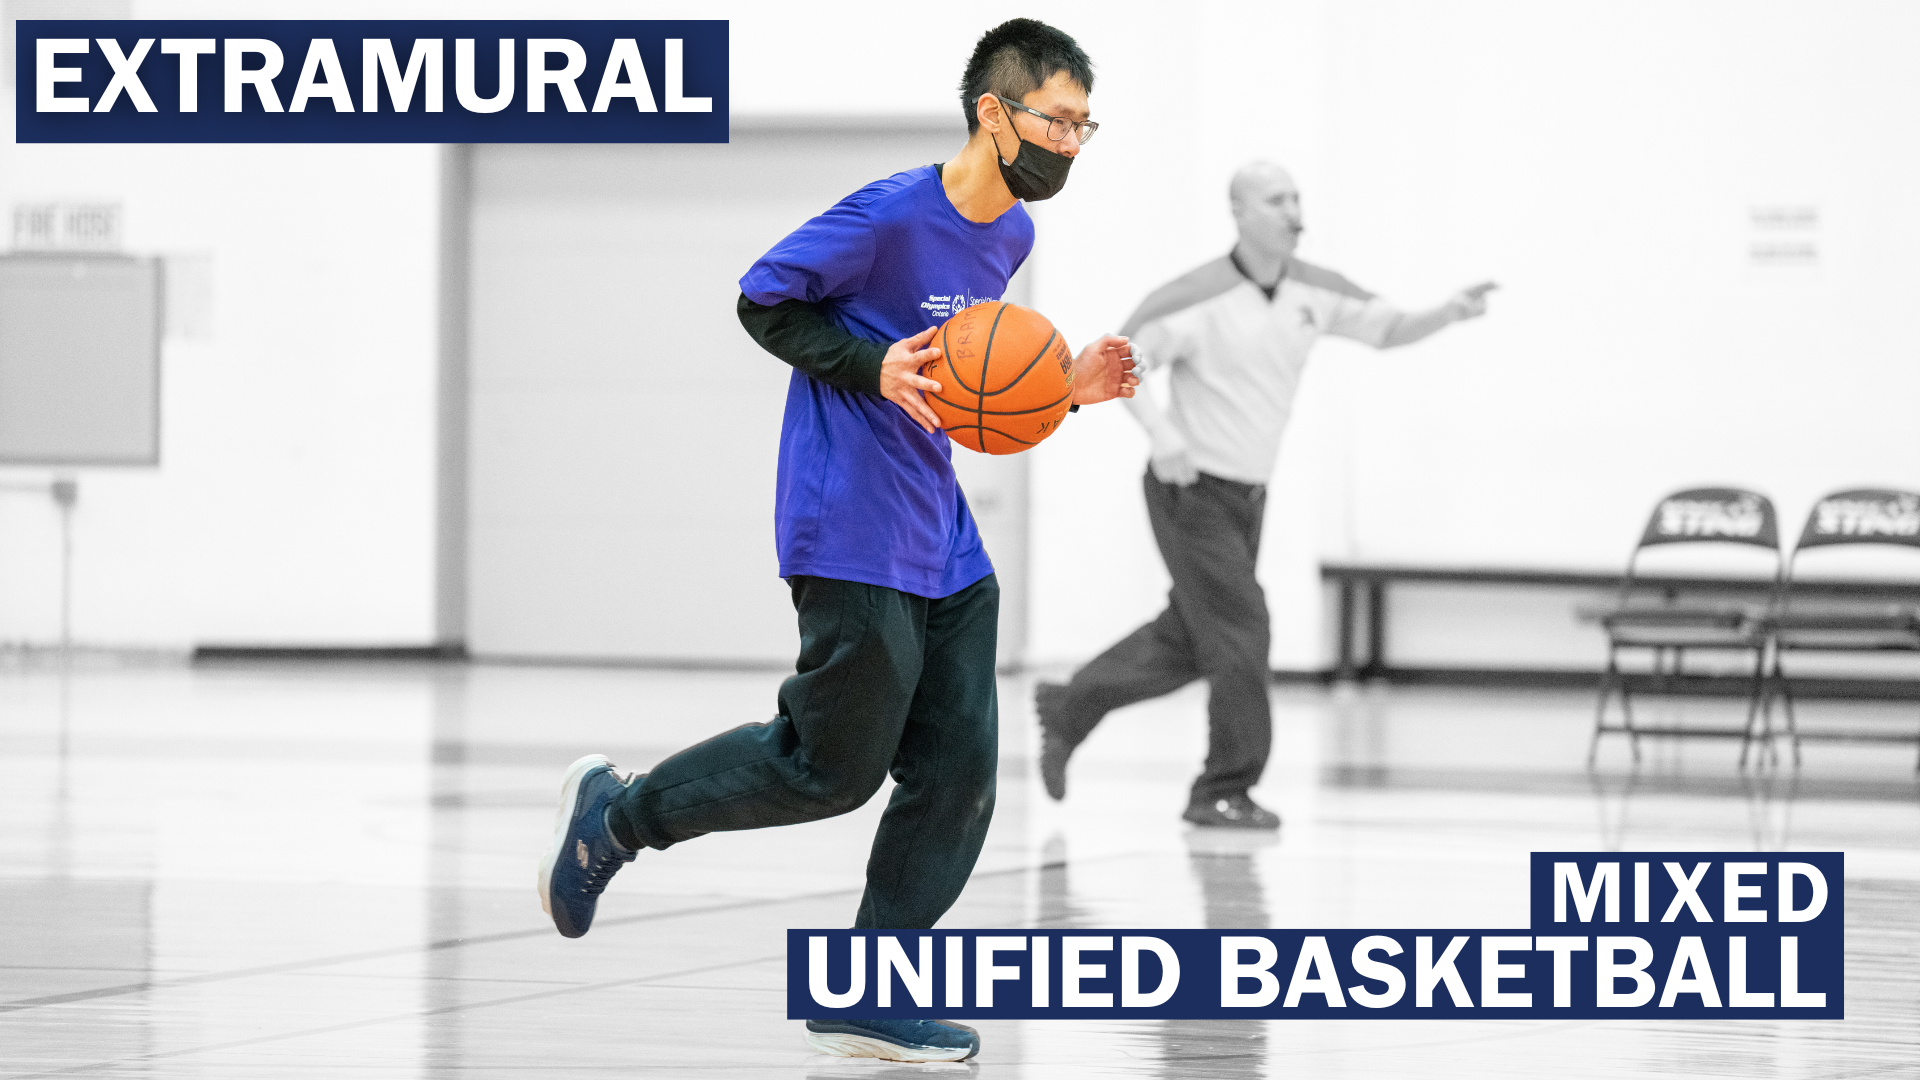 Extramural Mixed Unified Basketball